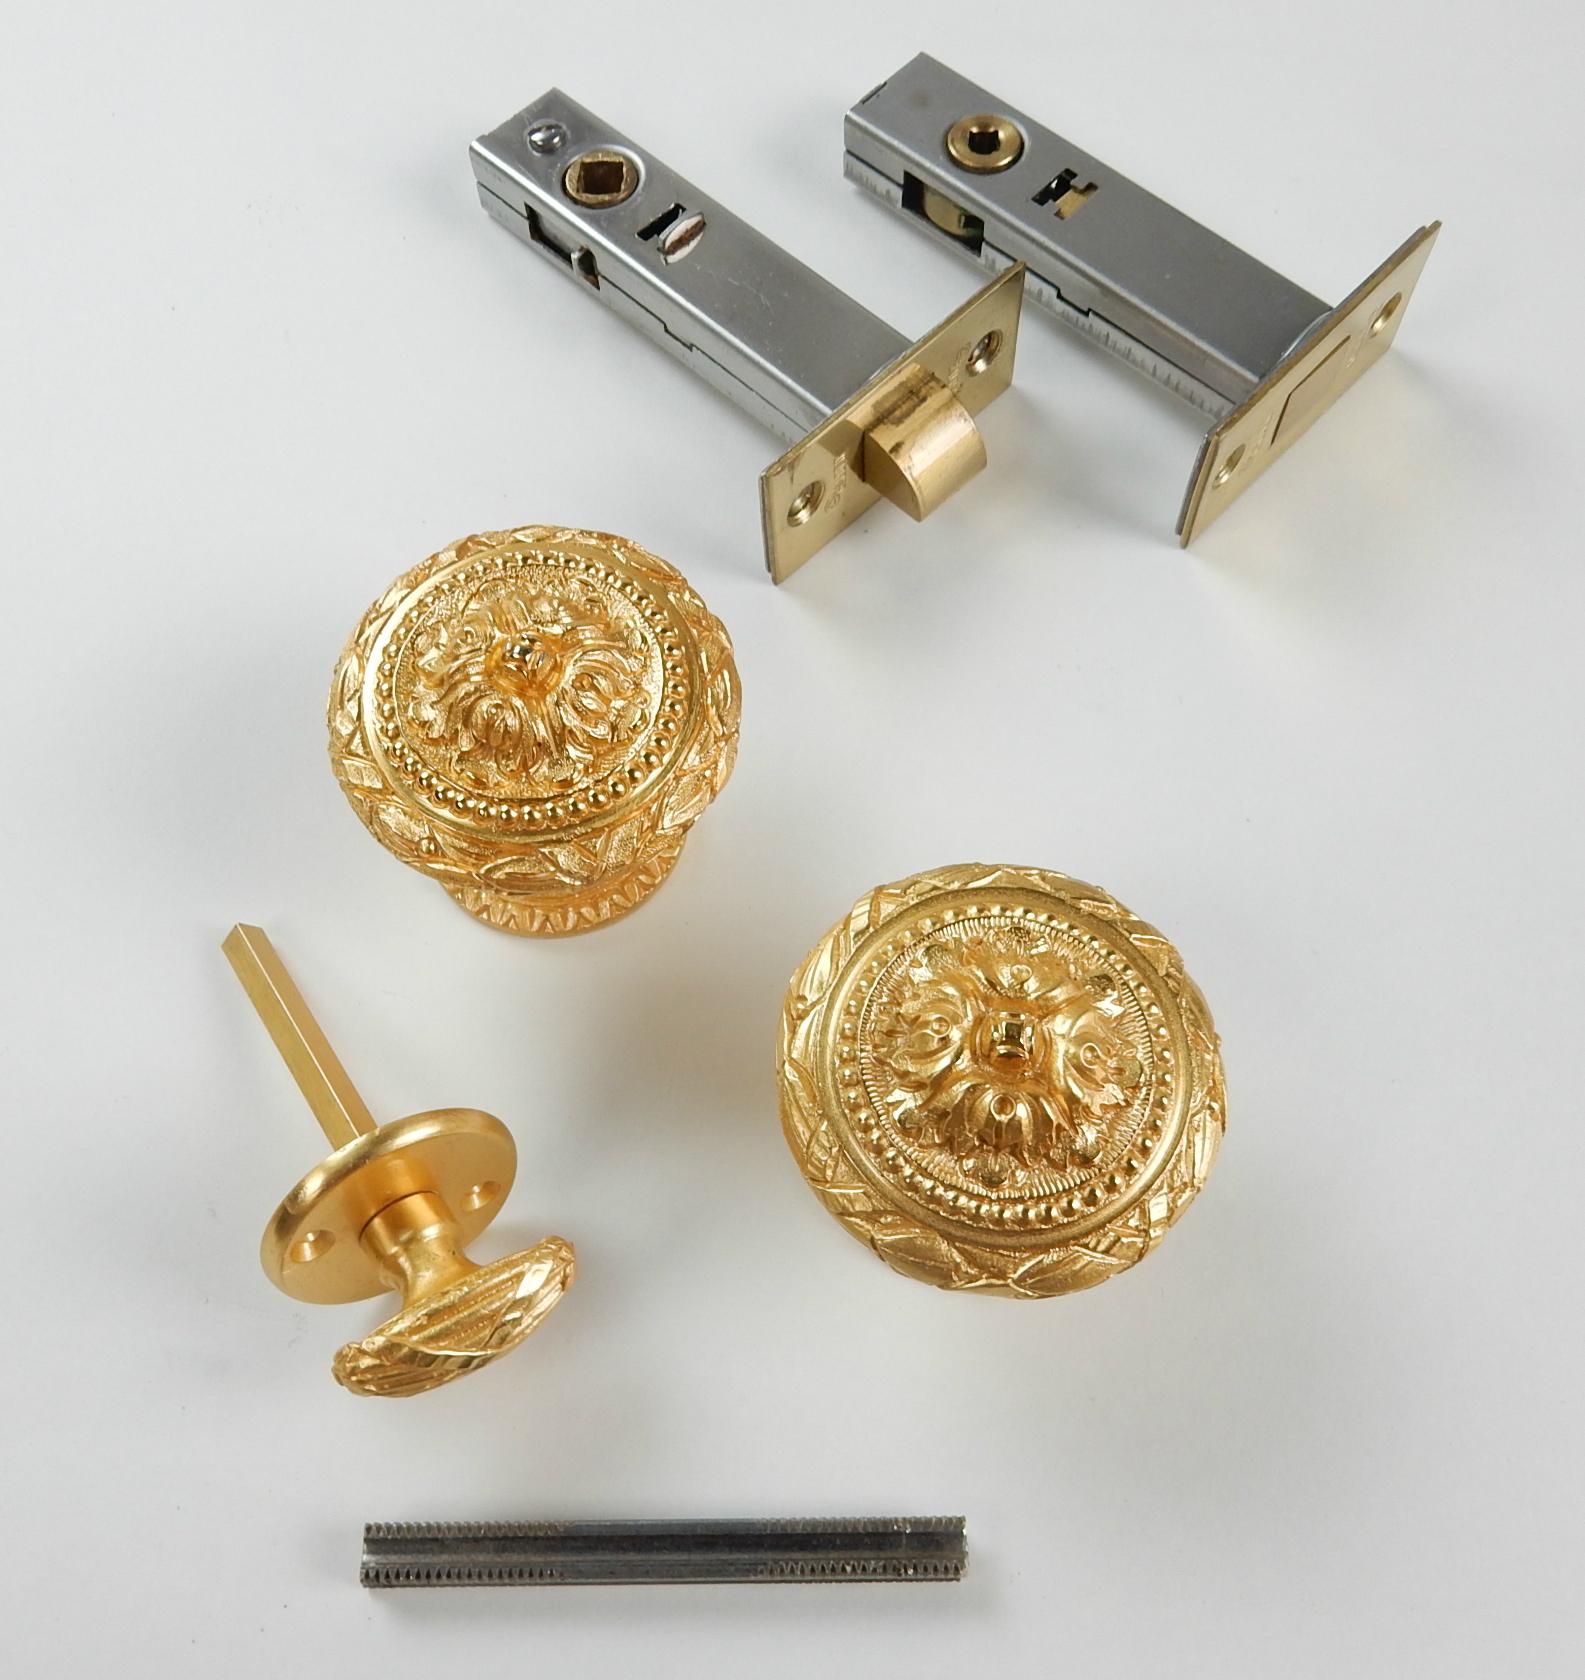 Gorgeous door knob and thumb bolt 22-karat gold plated set from
the Sherle Wagner collection circa 1960s.
This set includes 2 door knobs, thumb knob, threaded knob connector, side and deadbolt.
All parts are clean and almost flawless as you can